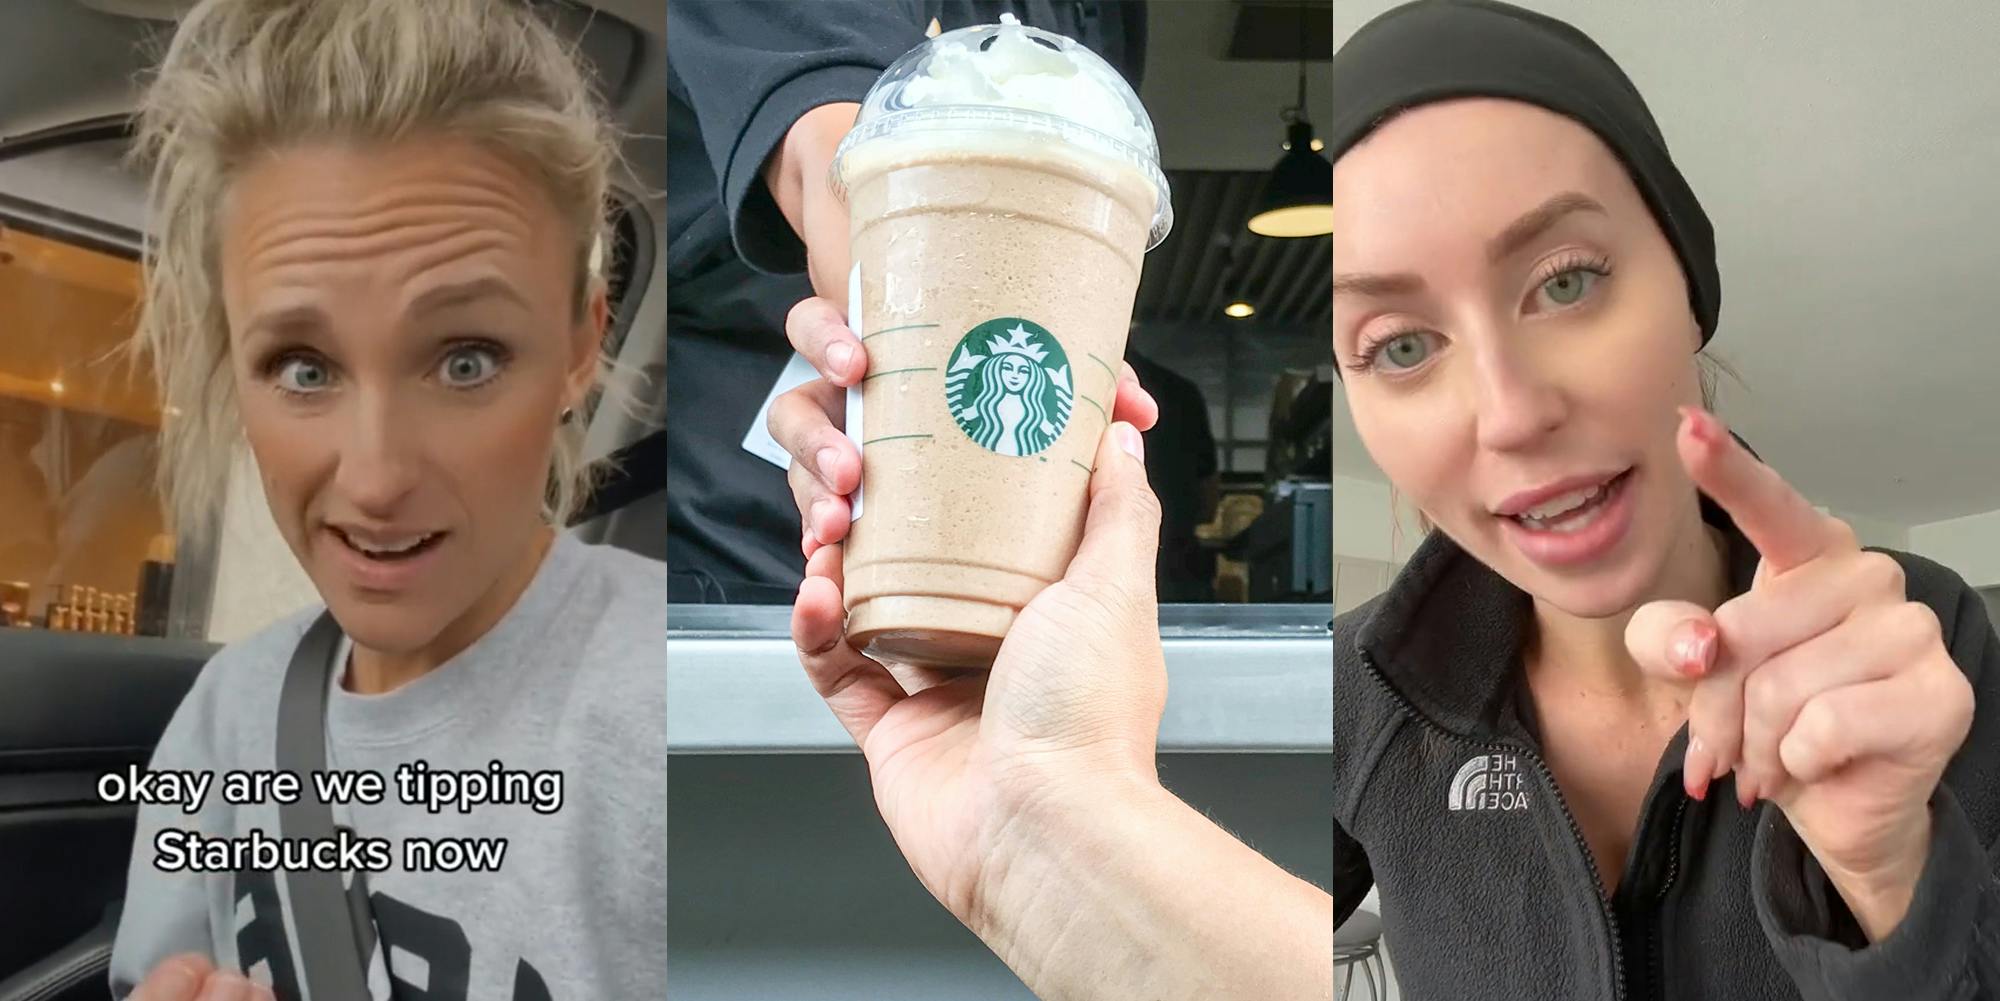 woman speaking in car with caption "okay are we tipping Starbucks now" (l) Starbucks drive thru window employee handing customer drink in cup (c) woman speaking pointing finger in front of white walls (r)